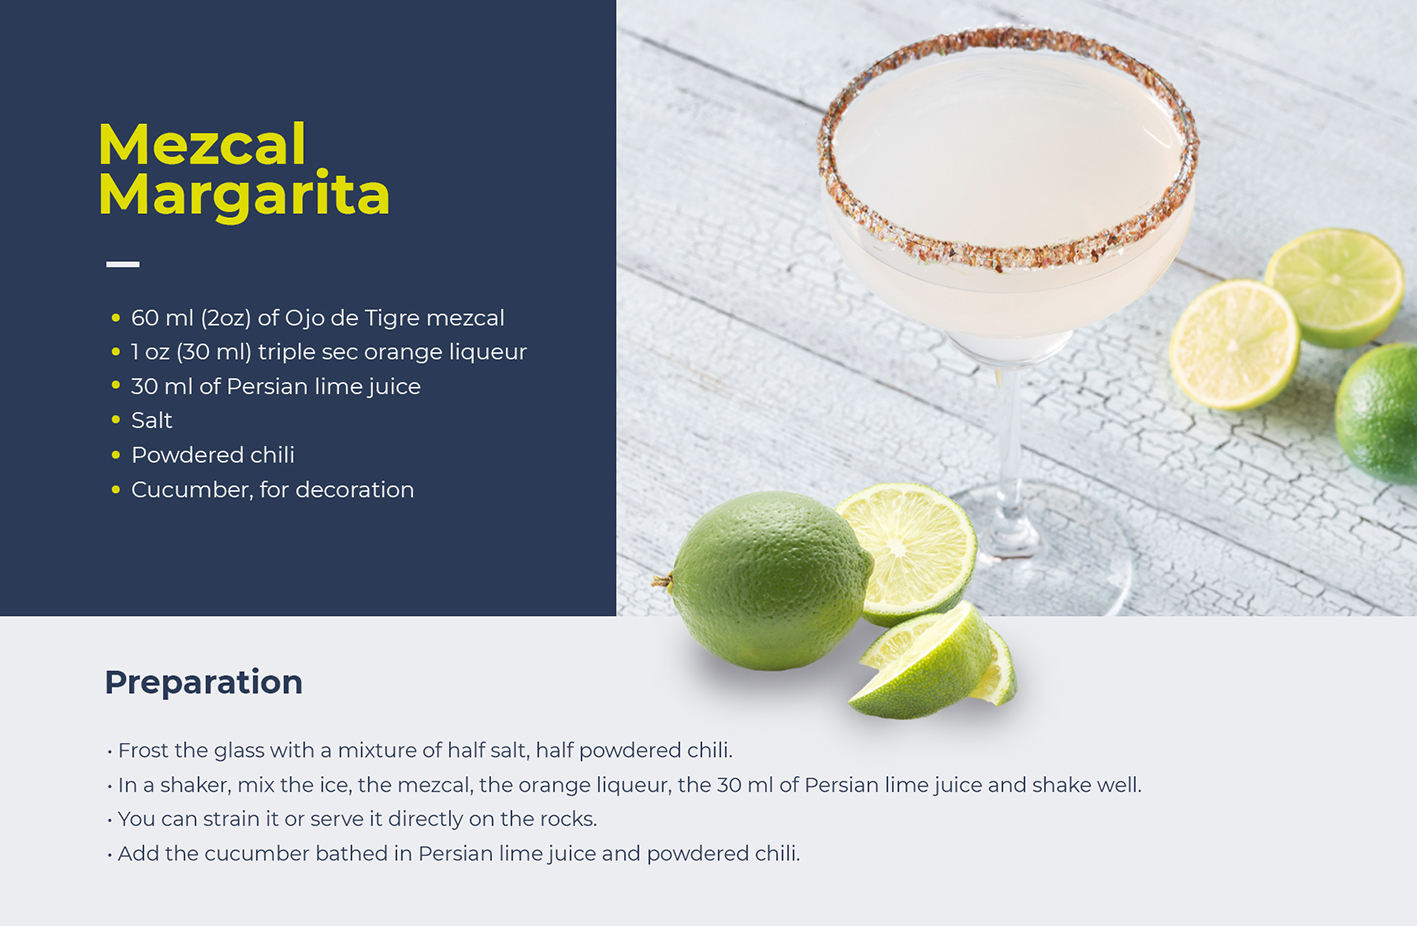 Here's a recipe of Mezcal Magarita: • 60 ml (2oz) of Ojo de Tigre mezcal • 1 oz (30 ml) triple sec orange liqueur • 30 ml of Persian lime juice • Salt • Powdered chili • Cucumber, for decoration Preparation • Frost the glass with a mixture of half salt, half powdered chili. • In a shaker, mix the ice, the mezcal, the orange liqueur, the 30 ml of Persian lime juice and shake well. • You can strain it or serve it directly on the rocks. • Add the cucumber bathed in Persian lime juice and powdered chili.